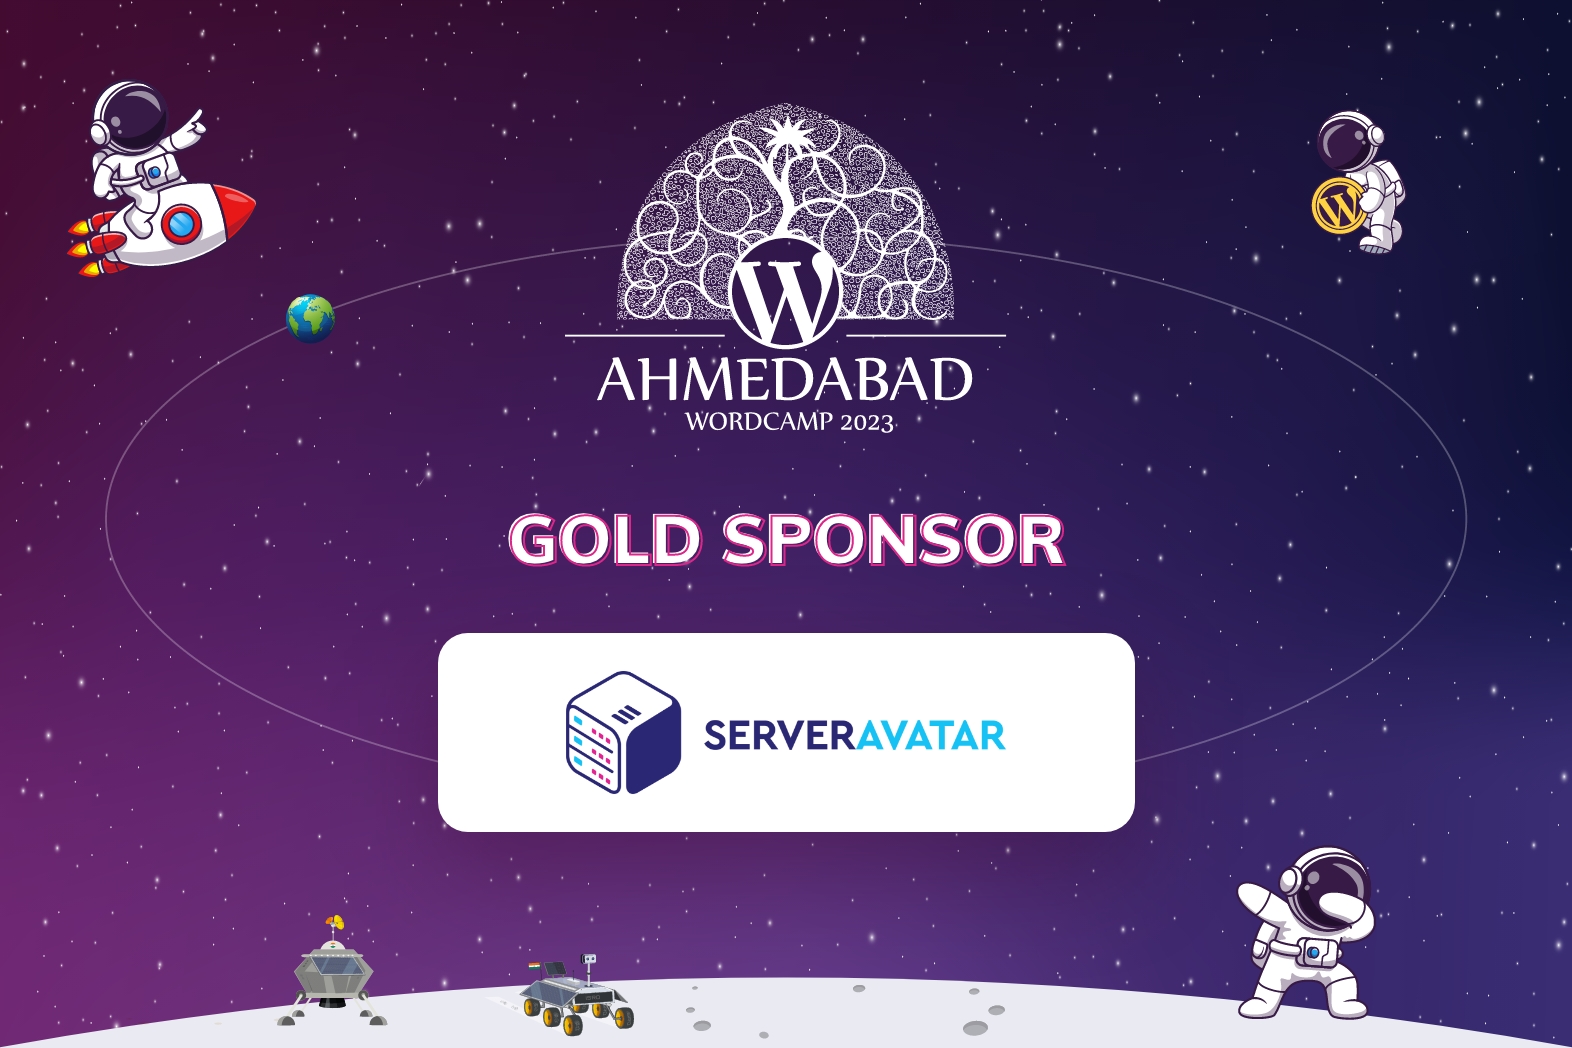 Thank You ServerAvatar, for being our Gold Sponsor 